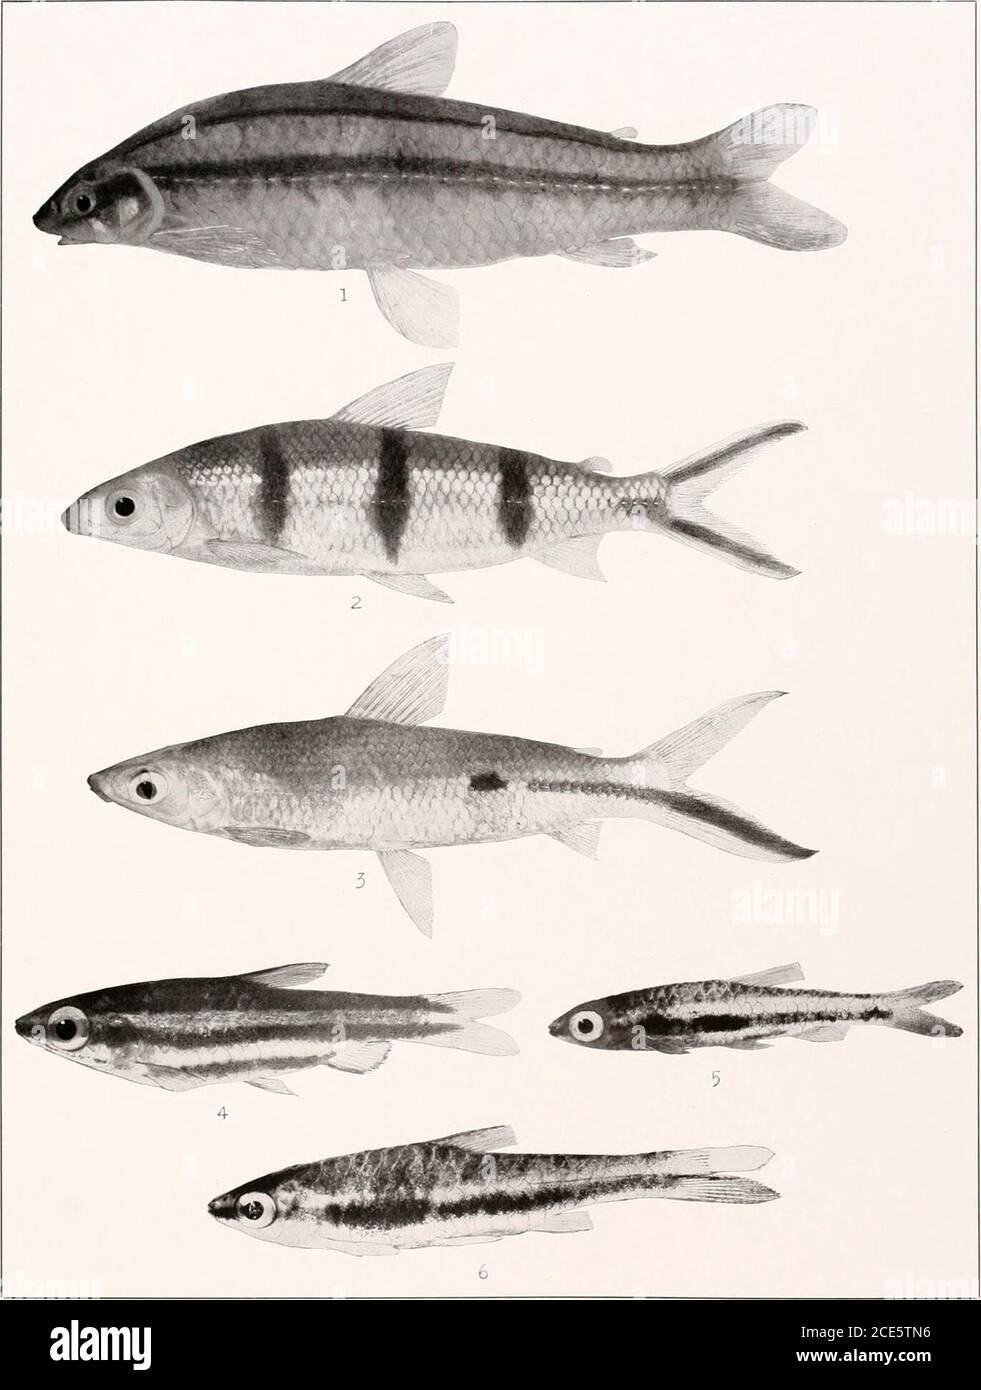 . The freshwater fishes of British Guiana, including a study of the ecological grouping of species and the relation of the fauna of the plateau to that of the lowlands . 1. Curimatus schomburgki Gunther. 146 mm. No. 2071a. 2. Prochilodus maripicru Eigen-ma.nn. (Type.) 282 mm. No. 2()(&gt;(i. .!. Tylobronchus maculosus Eigenmann. (Type.) 113mm. No. 1923. 4. Chilodus punctatus Muller and Thoschel. 77 mm. No. 1916. Memoirs Carnegie Museum, Vol. V. Plate XXXVI. 1. Parodon bifasciatus Eigenmann. (Type.) 104 mm. No. 1925. 2. Hemiodus quadrimaculatus Pelle-grin. 125 mm. No. 1930. 3. Hemiodus semitozn Stock Photo